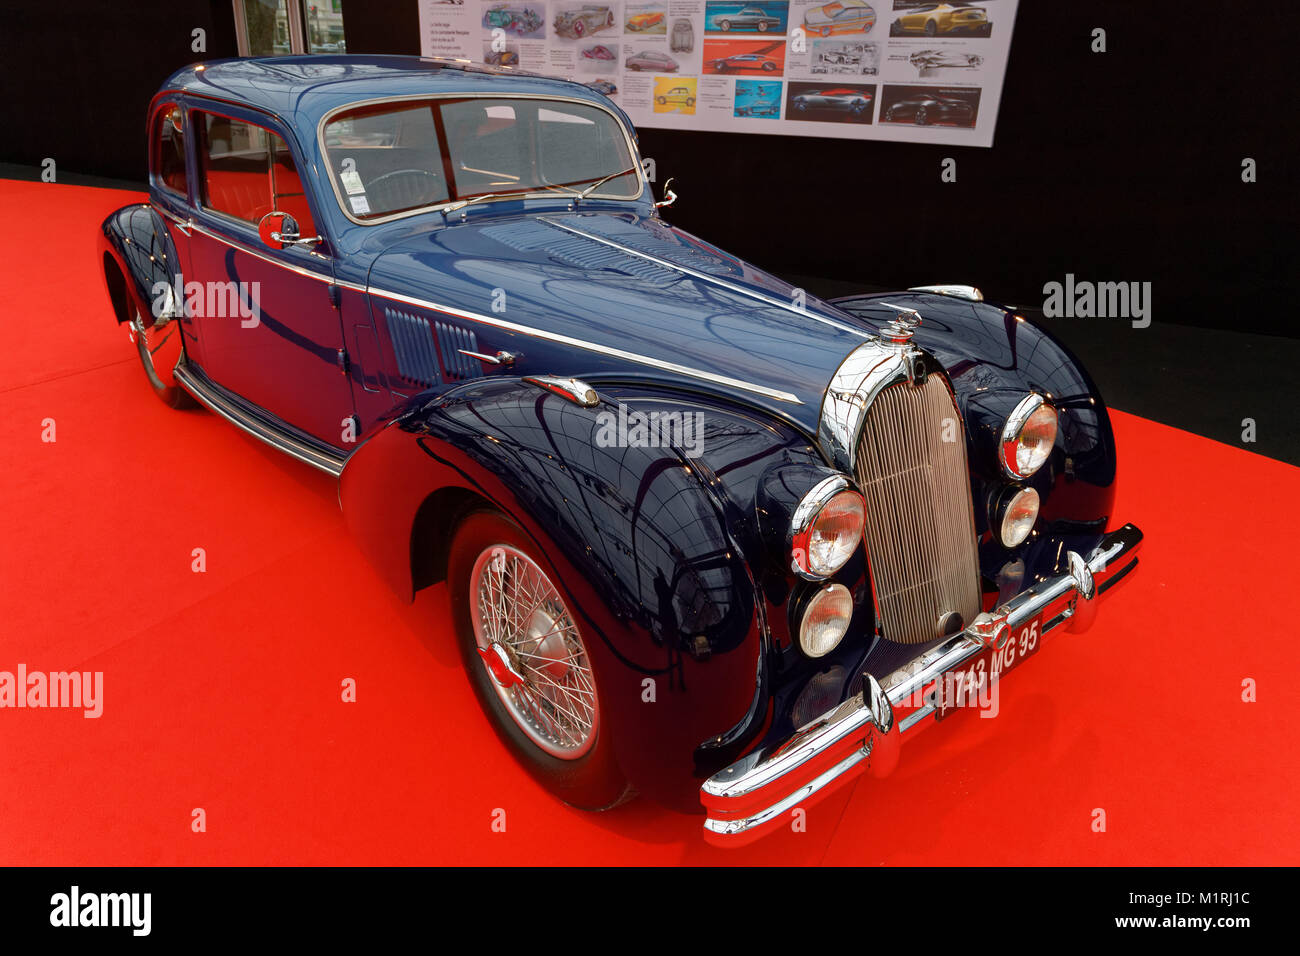 Paris, France. 31st January, 2018. TALBOT LAGO T26 RECORD COUPE 1948 - The International Automobile Festival brings together in Paris the most beautiful concept cars made by car manufacturers, from January 31 to February 4, 2018. Credit: Bernard Menigault/Alamy Live News Stock Photo